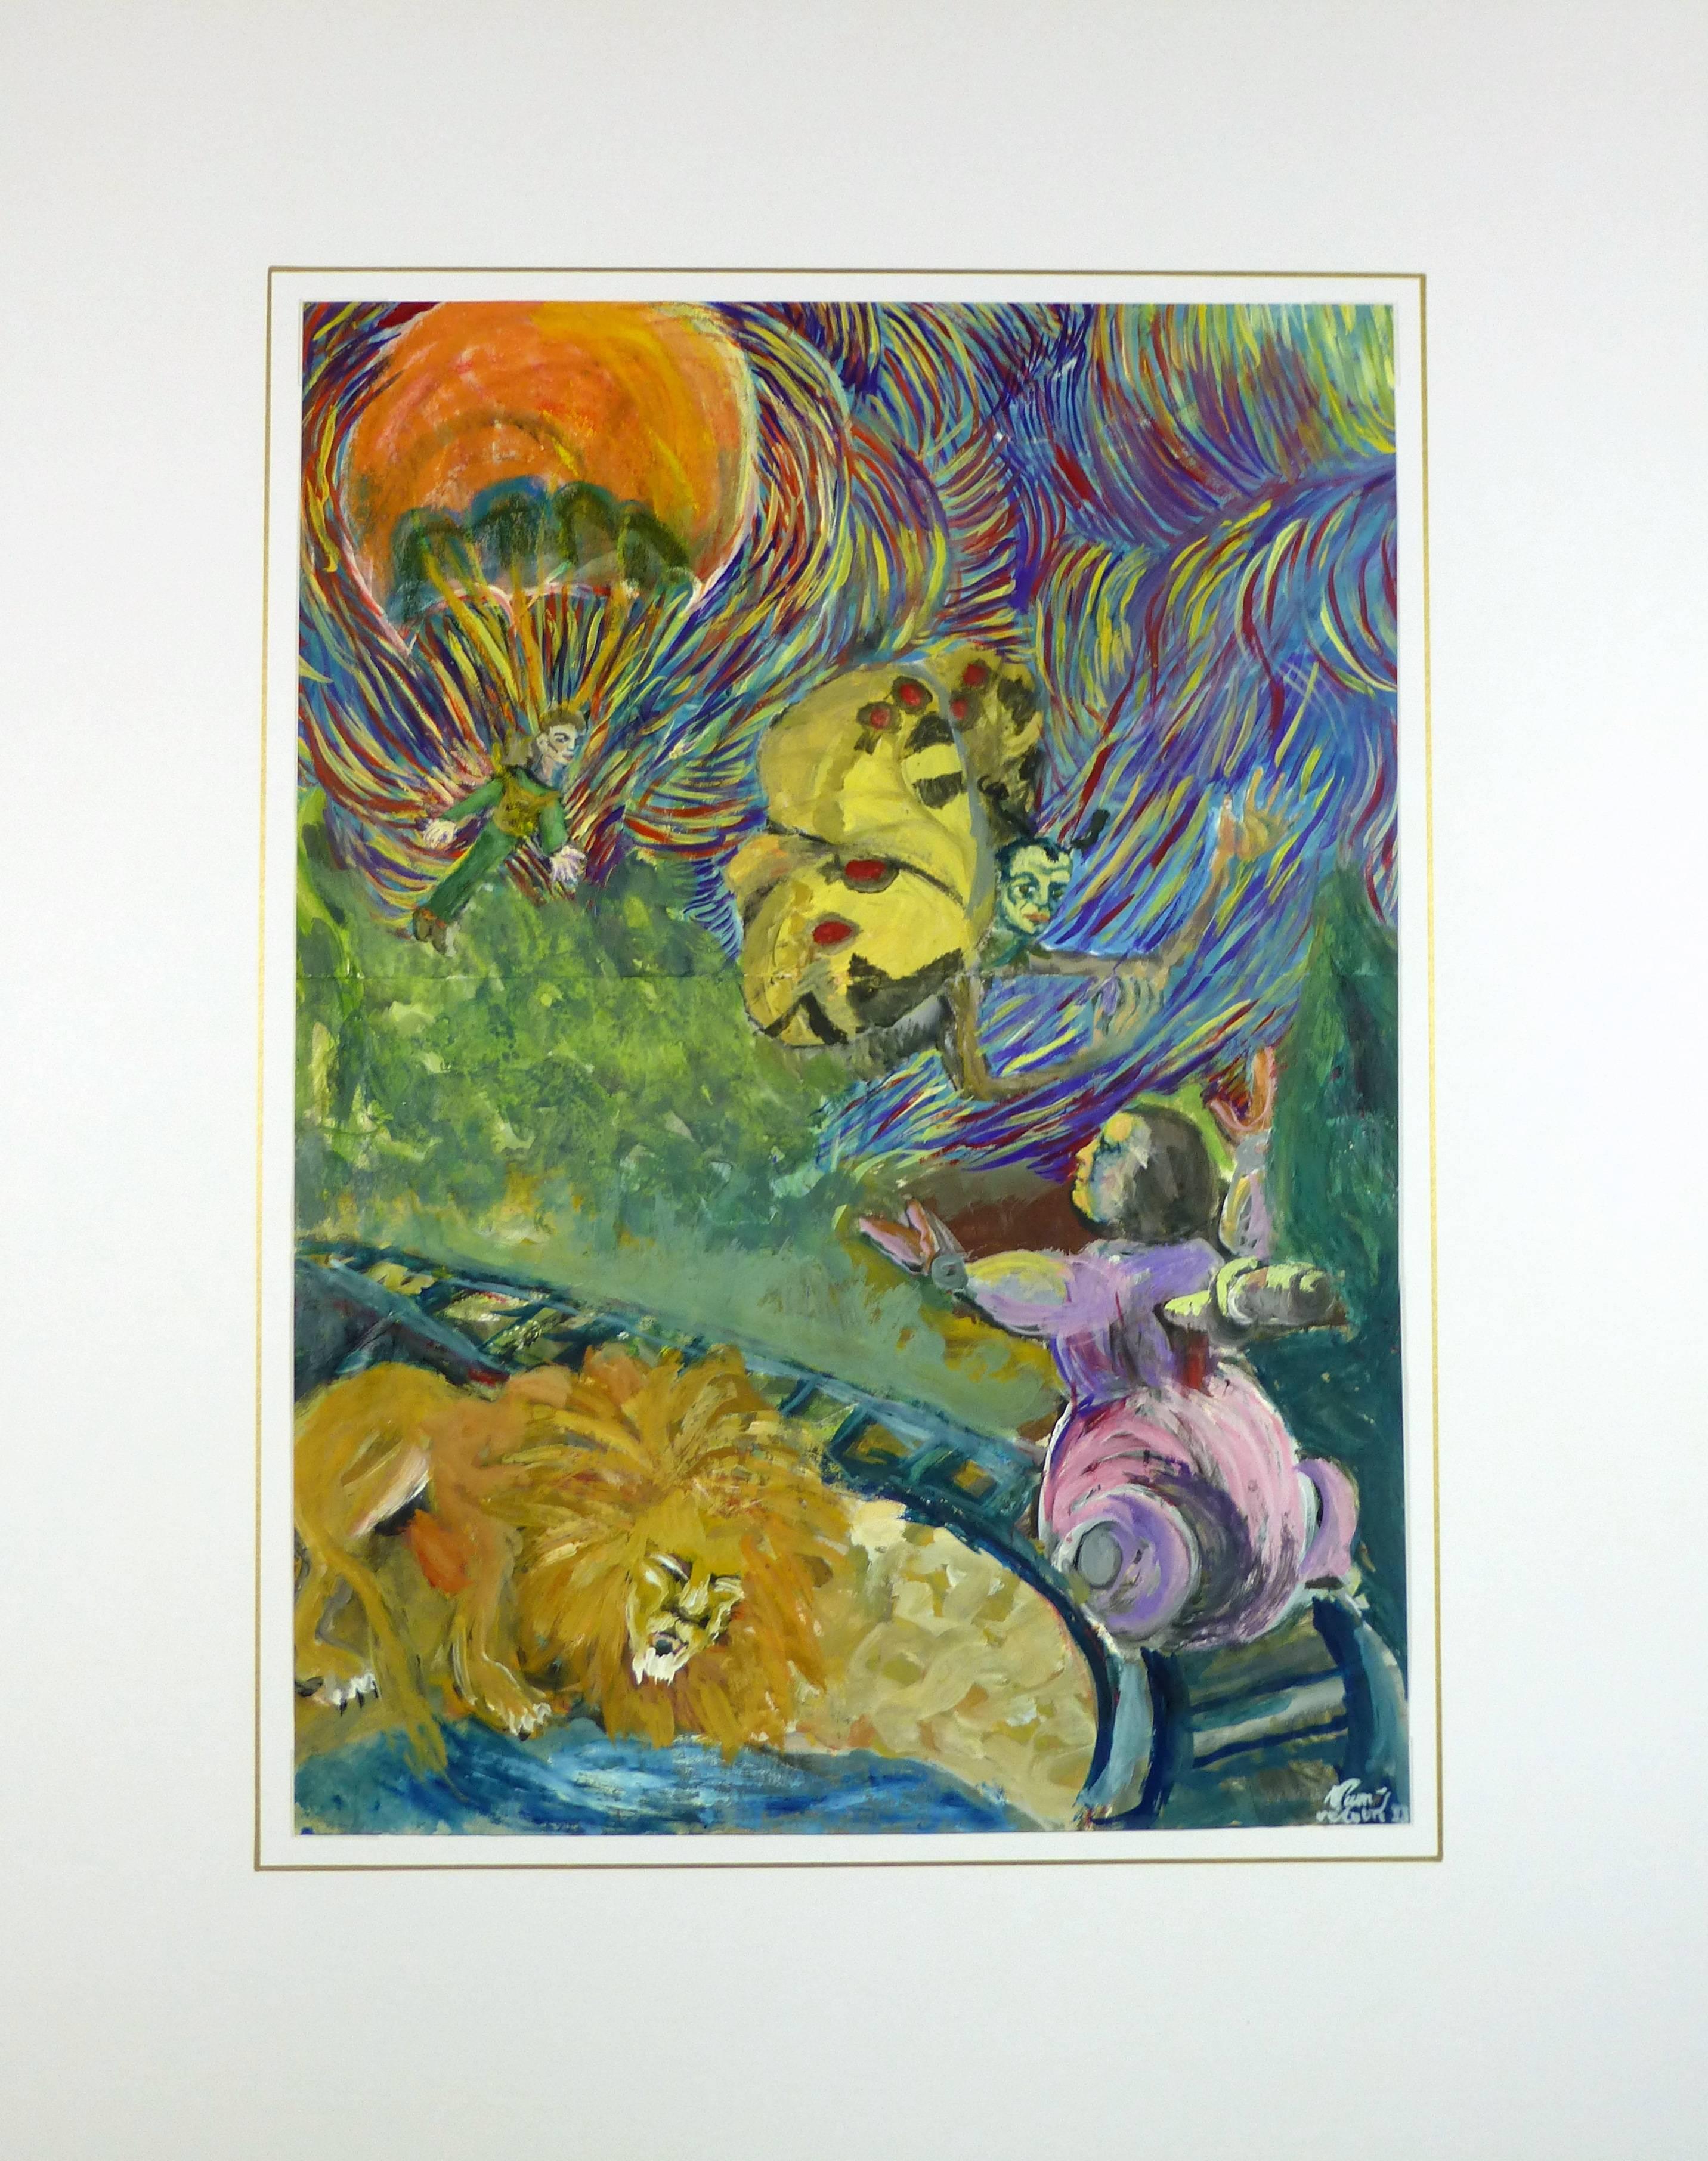 Colorful surrealist French painting of parachuter and lion, signed and dated lower right.

Original artwork on paper displayed on a white mat with a gold border. Archival plastic sleeve and Certificate of Authenticity included. Artwork, 15